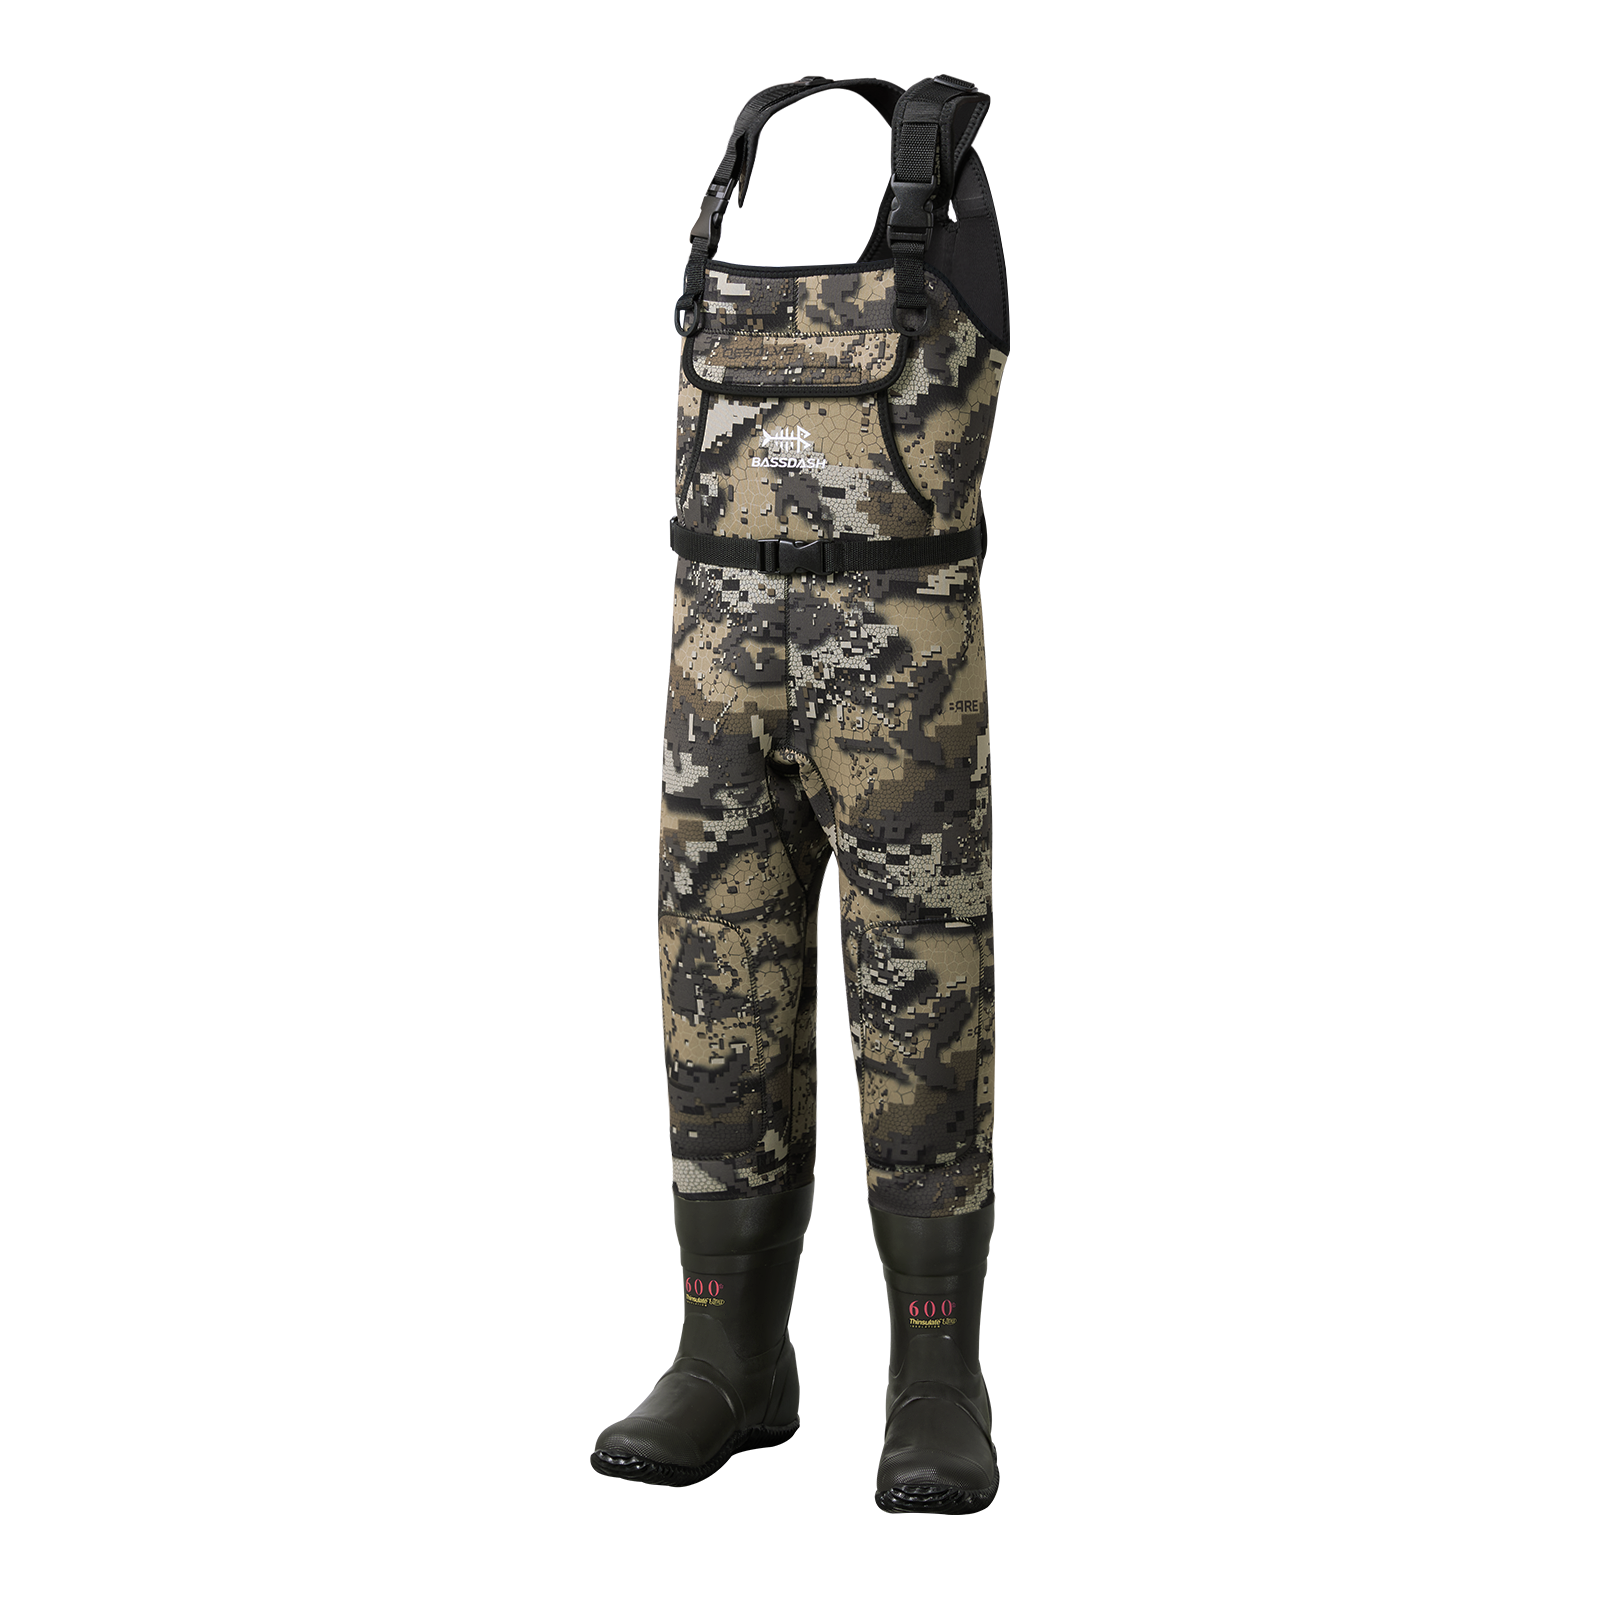 Kid’s Neoprene Waders with 600g Insulated Rubber Boots - Boot Foot - Bare  Camo / 4-5Y